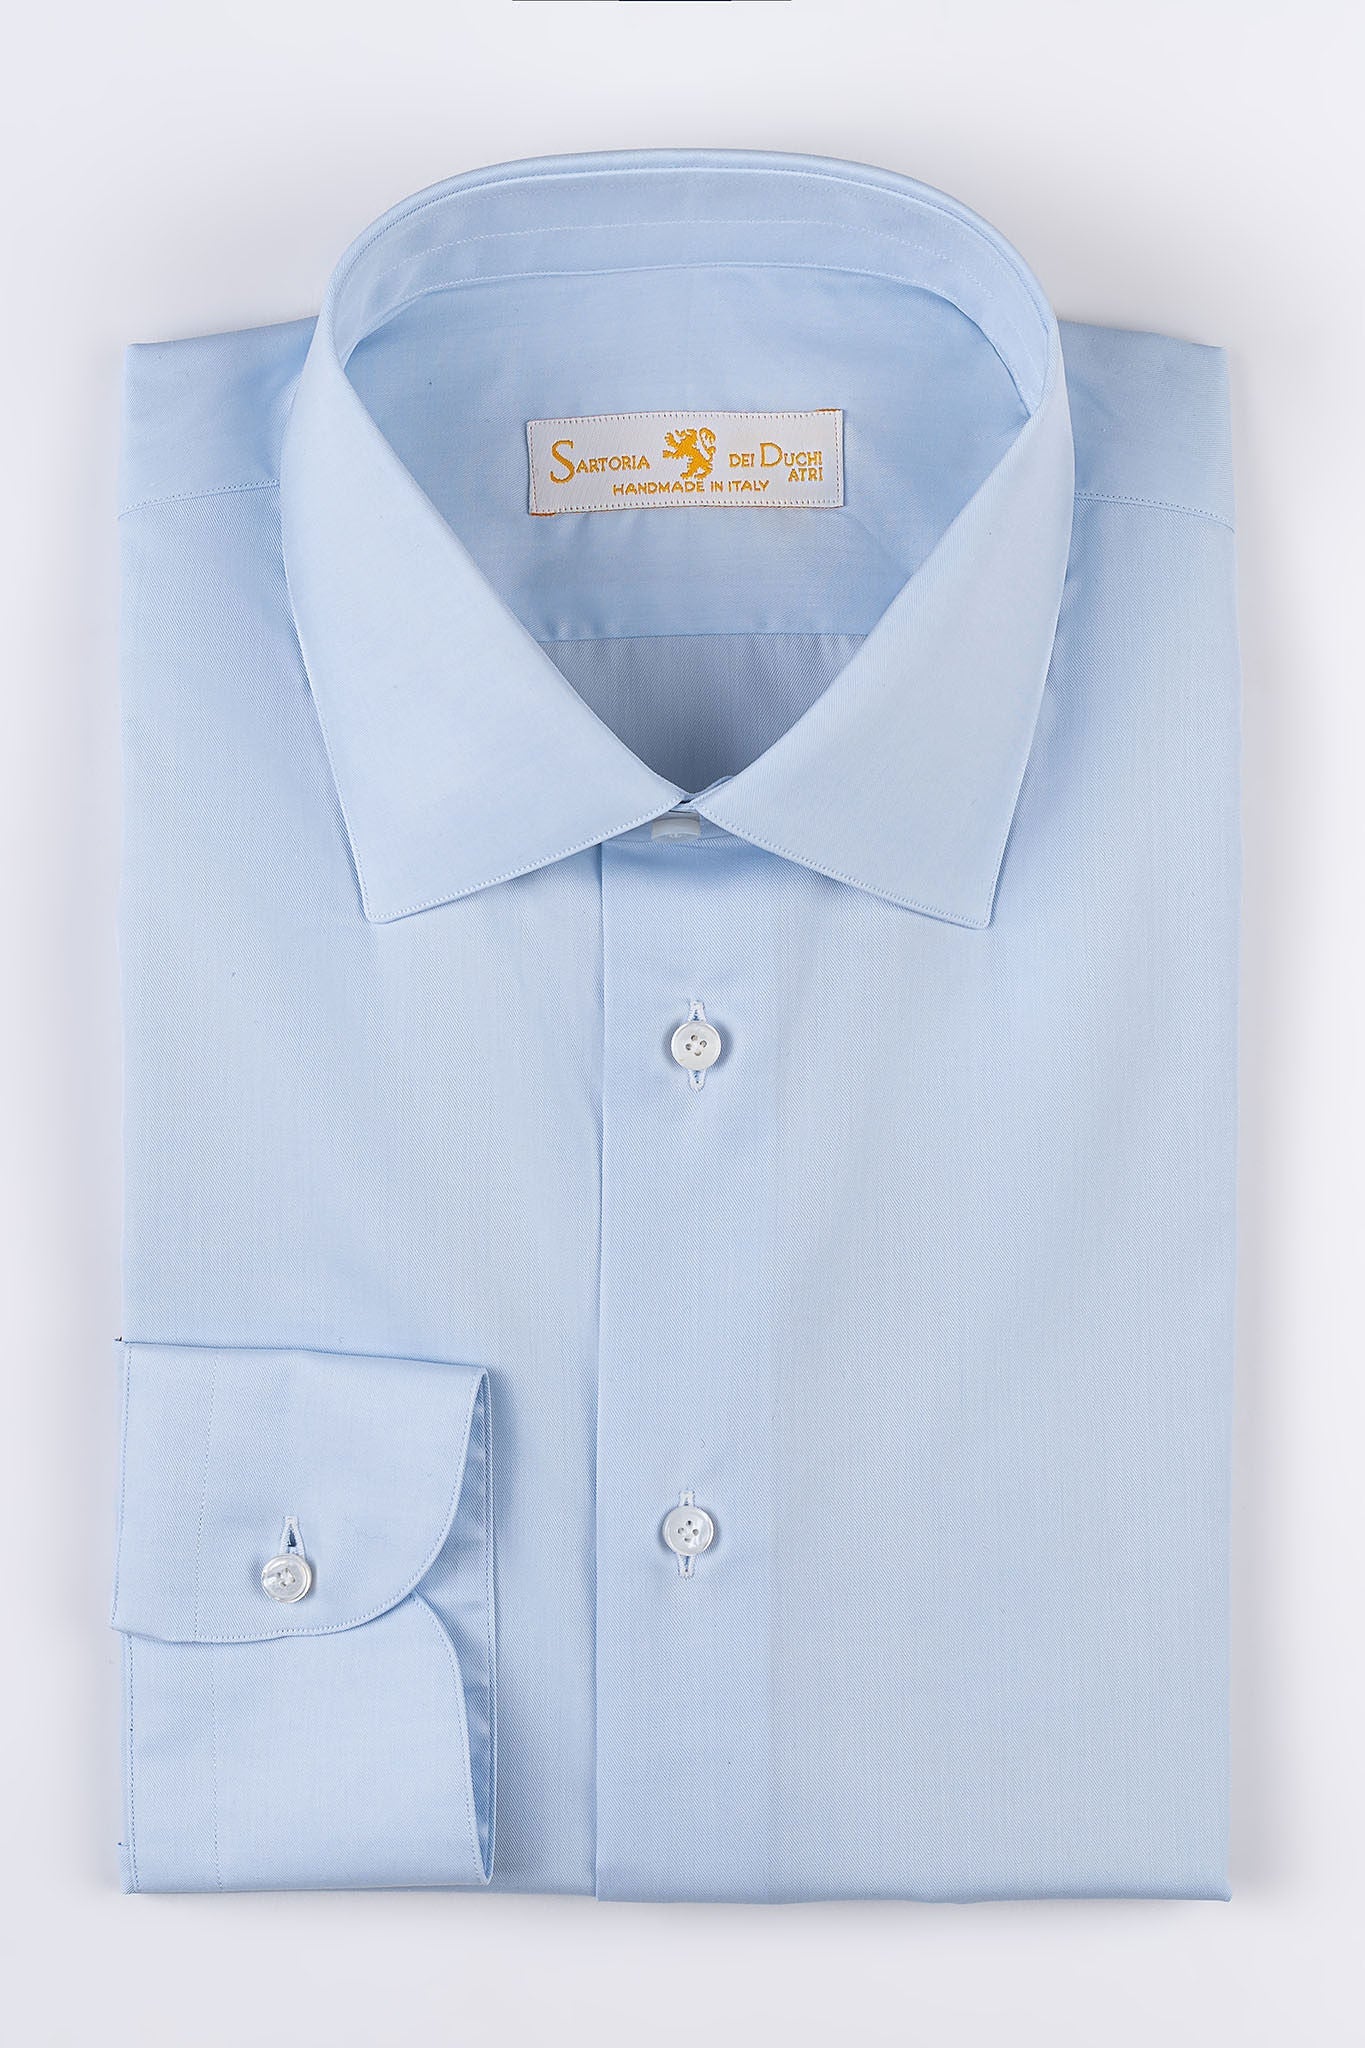 Our “HAMPTON SHIRT” is realized with a 140/2 cotton twill by Thomas Mason &quot;Hampton&quot;, in light blue color. This long sleeve shirt is made with a semi French collar and a rounded wrist. The stitching is 5 mm and the buttons, applied by hand, are in mother of pearl Australia.  The fit is regular. - Sartoria Dei Duchi-Atri